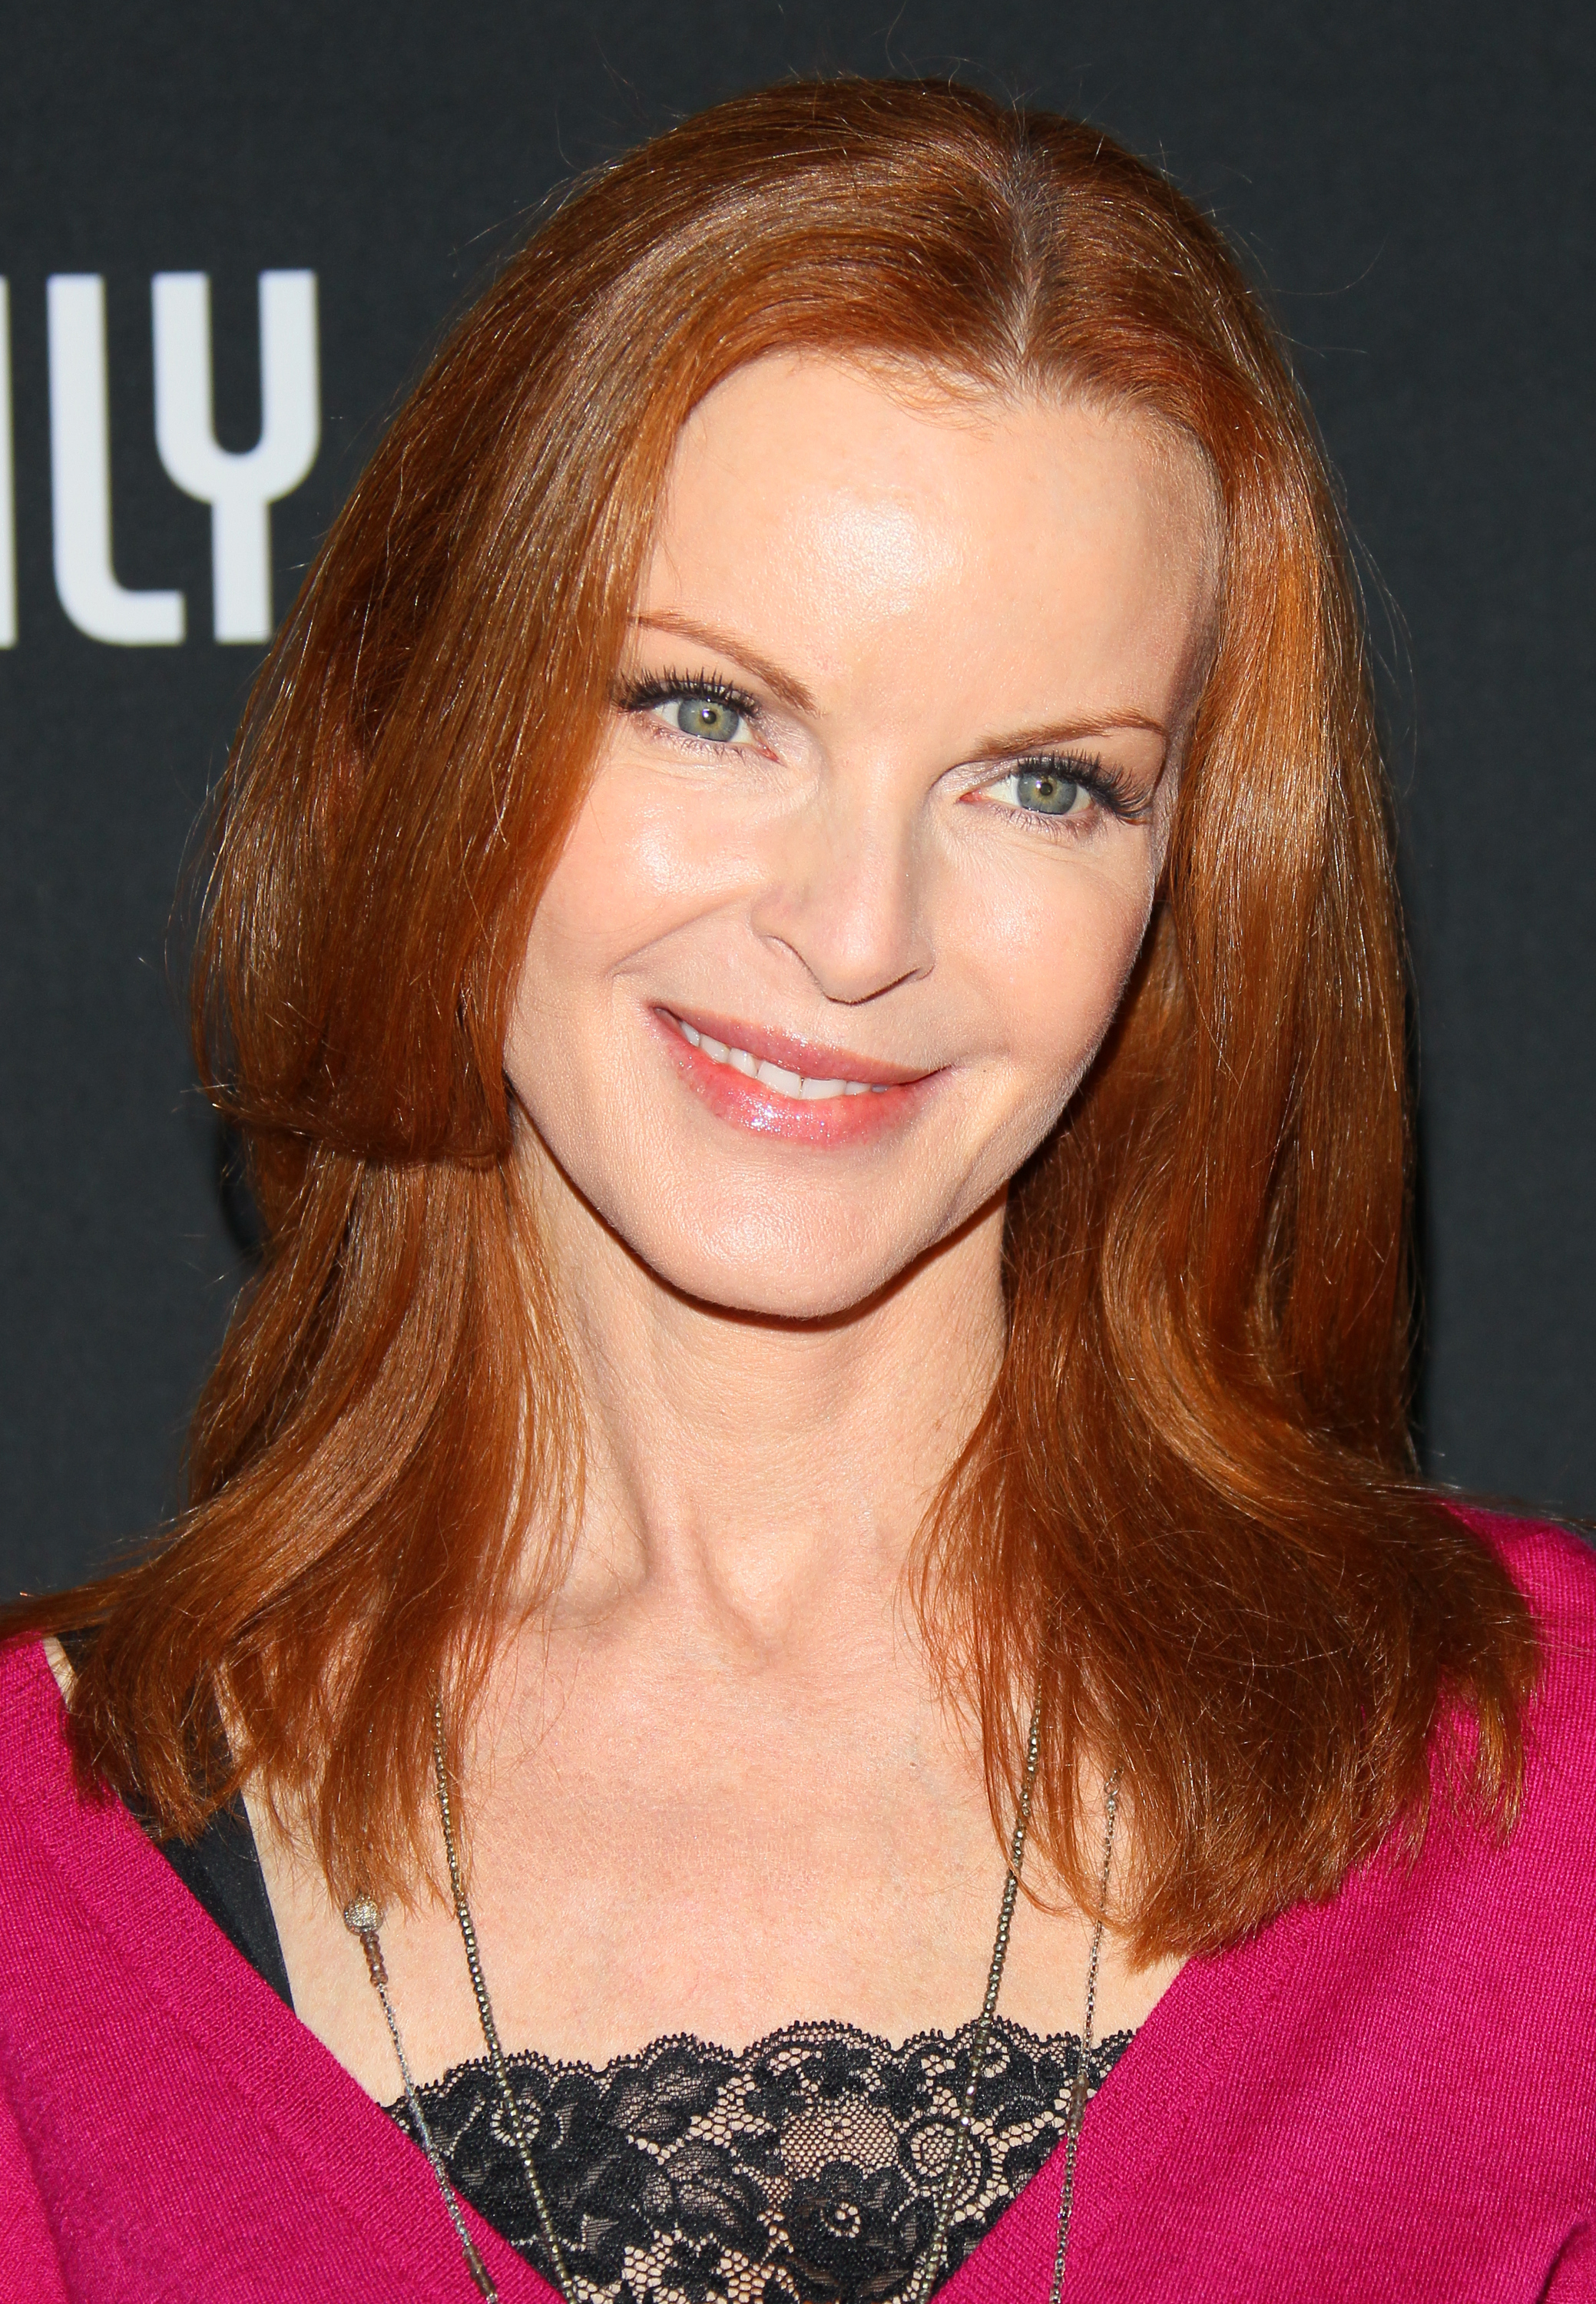 Marcia Cross besucht die 8th Annual Pink Party am 27. Oktober 2012 | Quelle: Getty Images